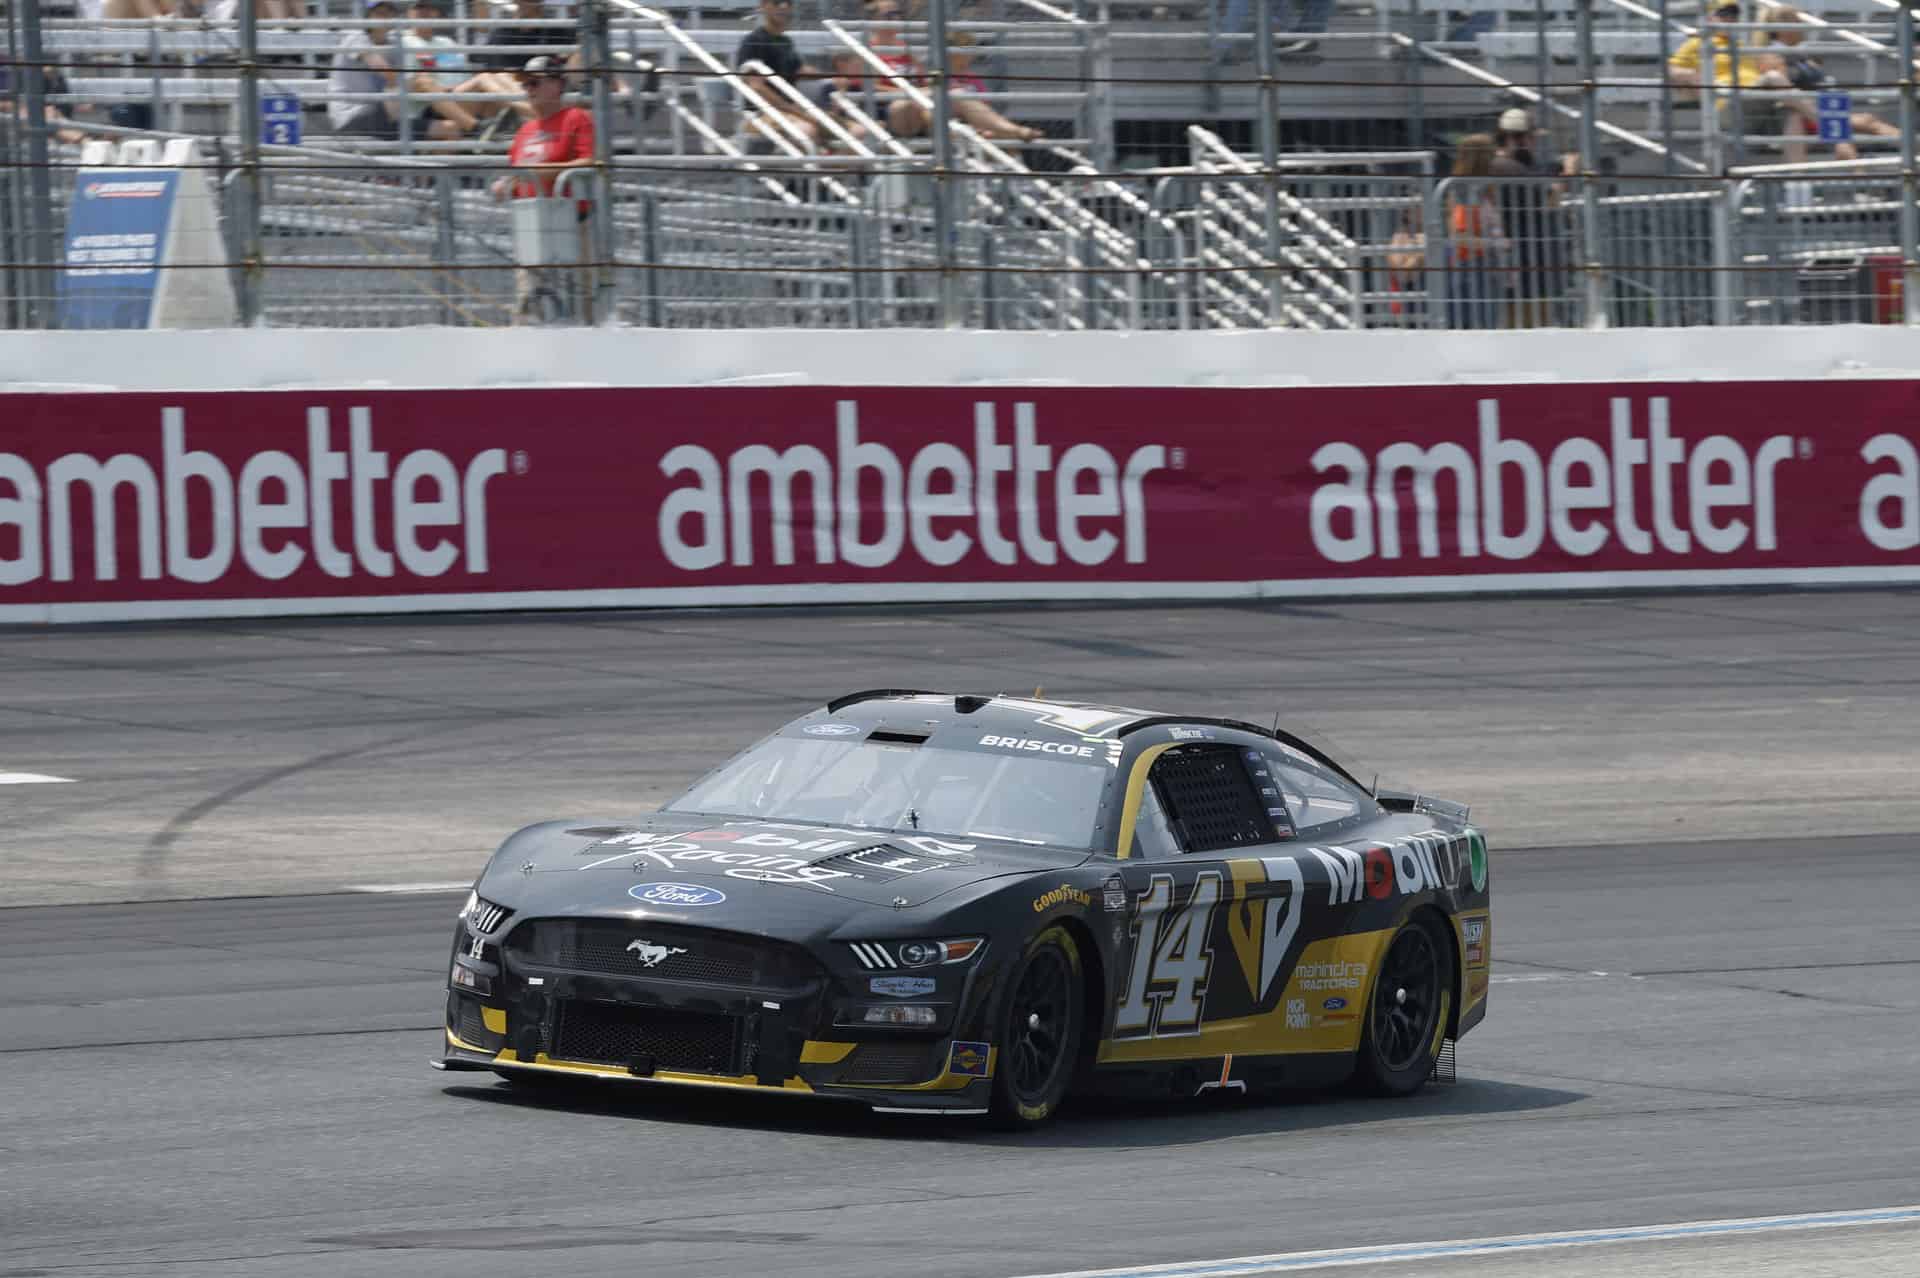 Stewart-haas racing's chase briscoe earned a top-10 finish in the nascar cup series crayon 301 at 'his worst racetrack. '